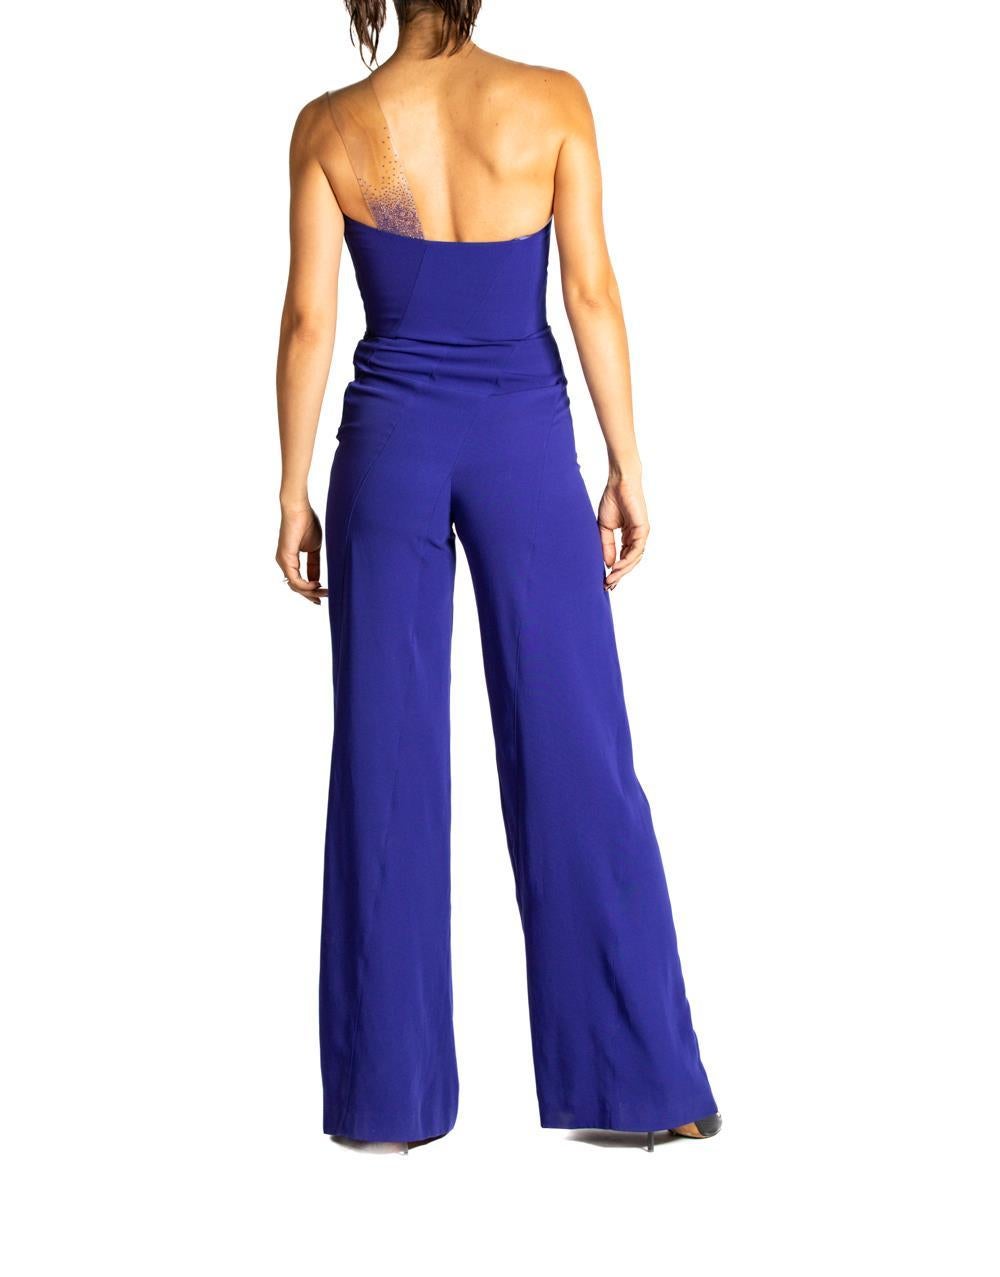 Women's 1990S THIERRY MUGLER Cobalt Blue Rayon Blend Jumpsuit With Beaded Clear Vinyl S For Sale